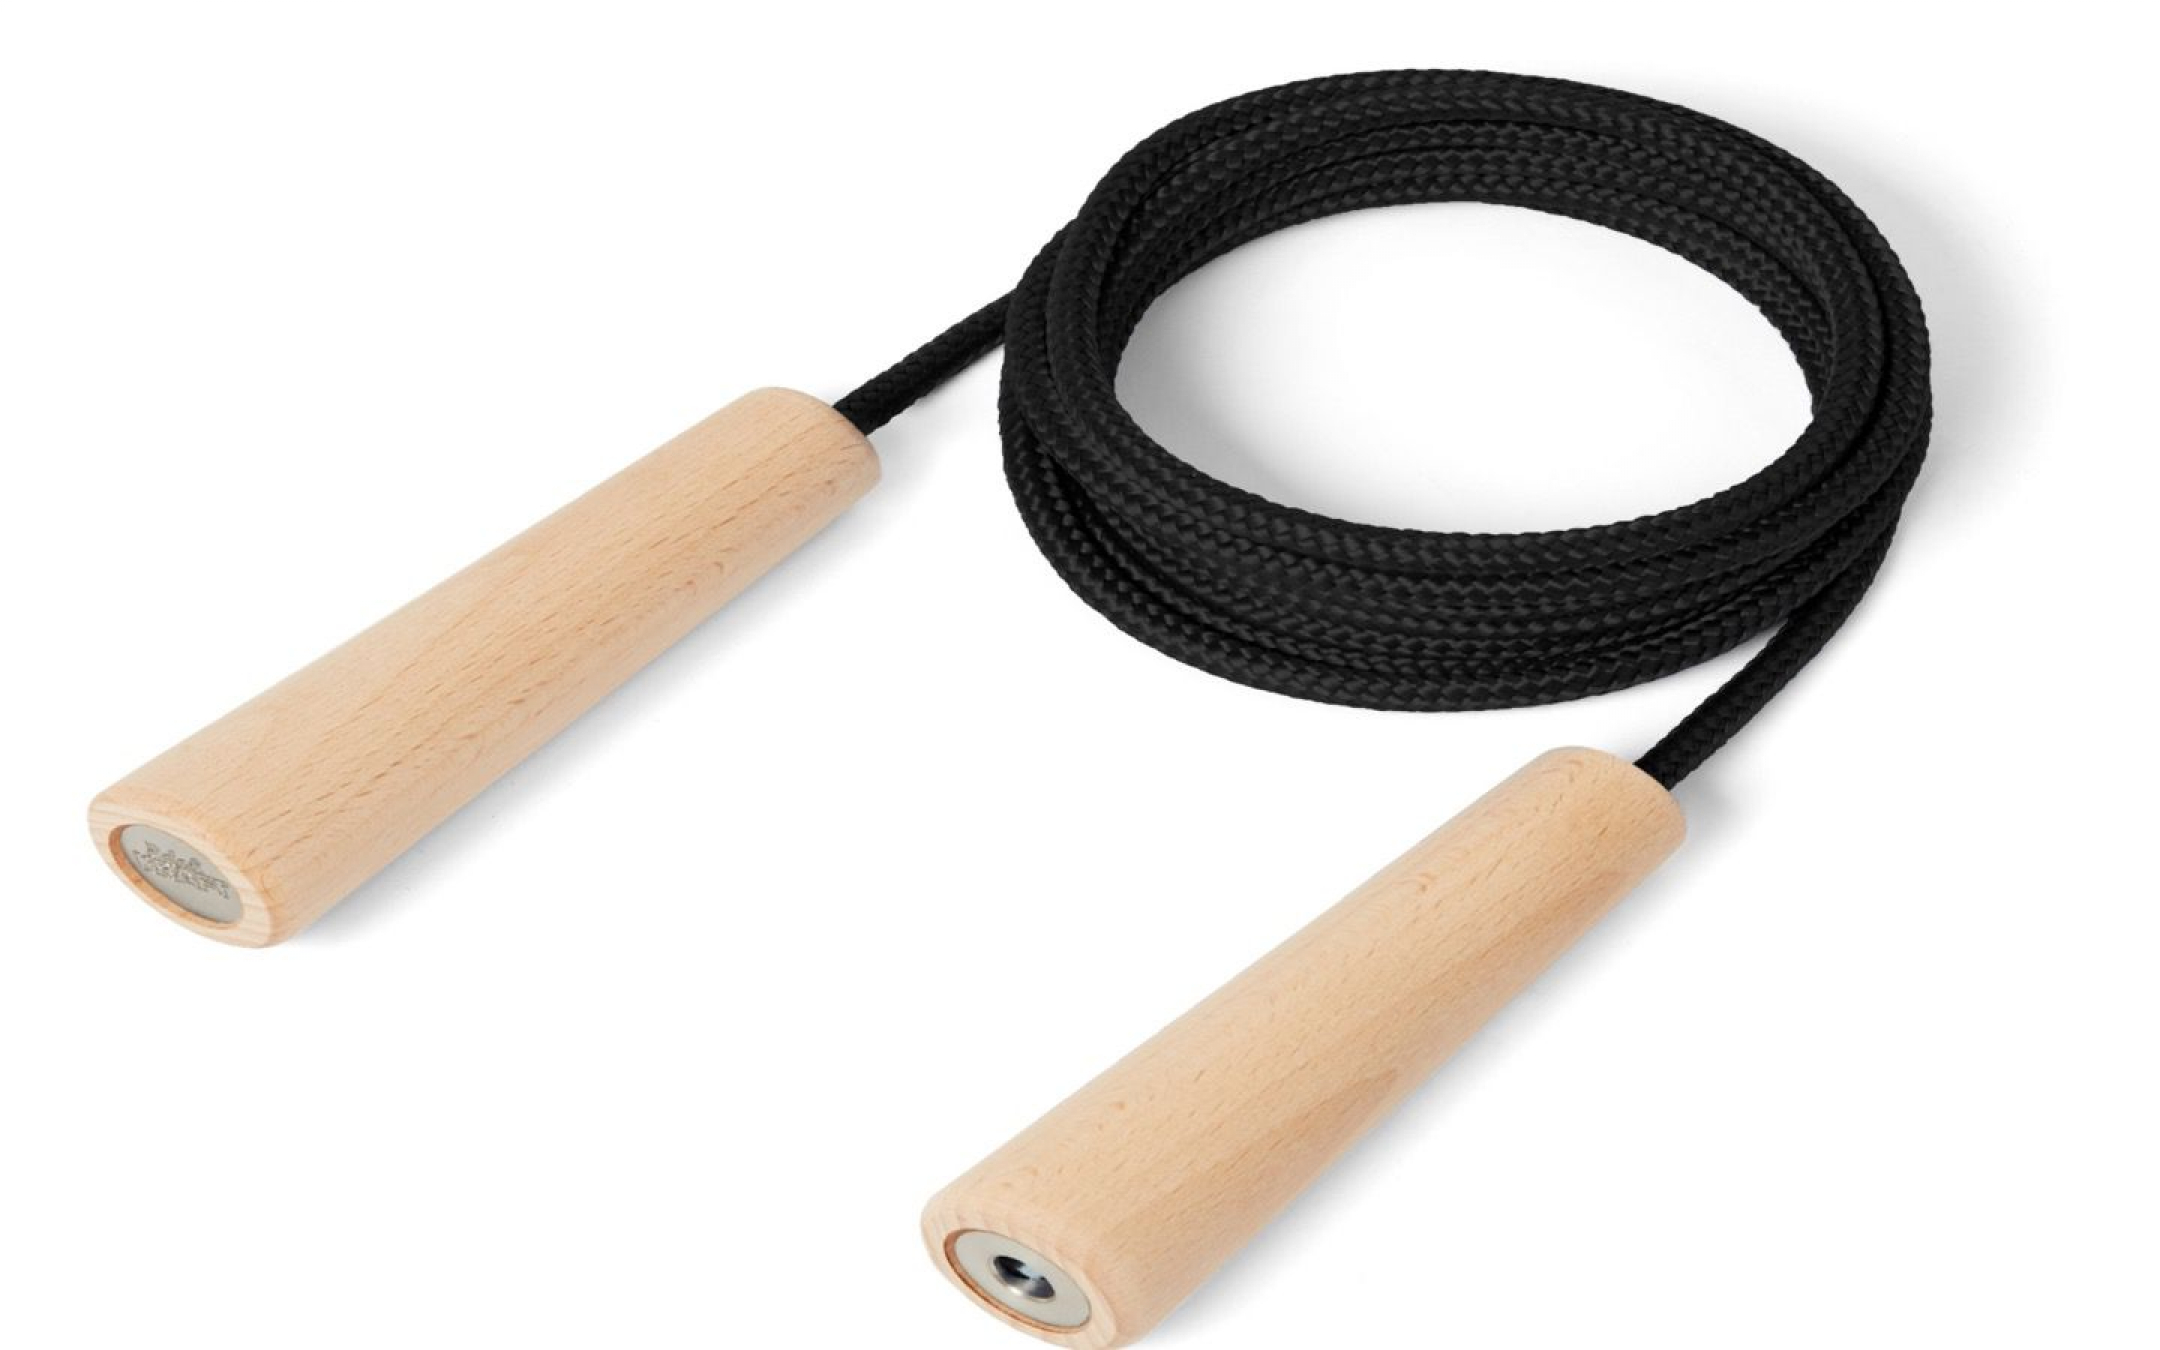 Skipping rope from PET bottles